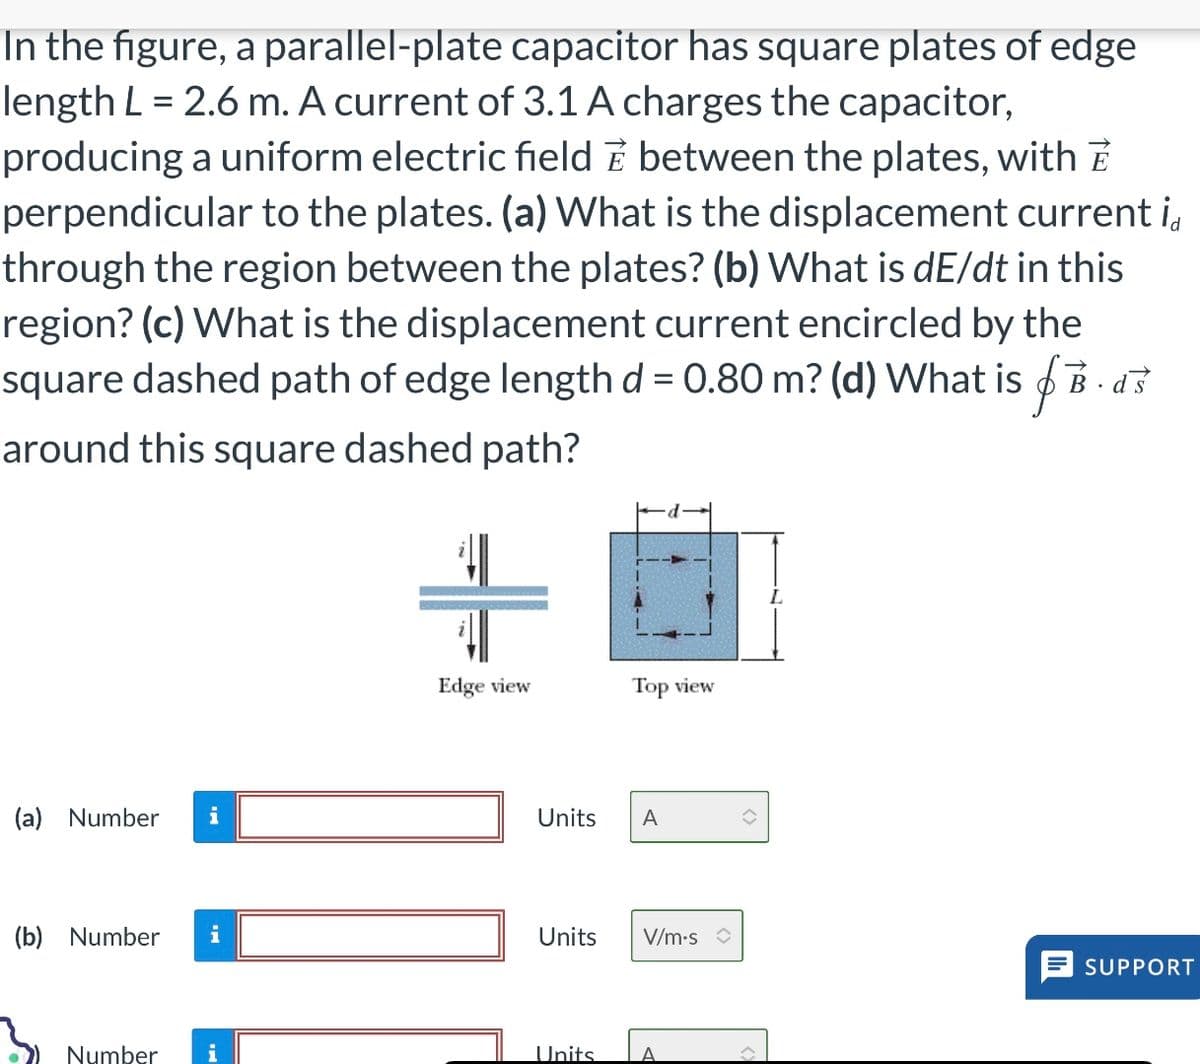 In the figure, a parallel-plate capacitor has square plates of edge
length L = 2.6 m. A current of 3.1 A charges the capacitor,
producing a uniform electric field between the plates, with
perpendicular to the plates. (a) What is the displacement current i
through the region between the plates? (b) What is dE/dt in this
region? (c) What is the displacement current encircled by the
square dashed path of edge length d = 0.80 m? (d) What is B. d
around this square dashed path?
(a) Number i
(b) Number i
Number
Edge view
Top view
Units A
Units V/m.s
Units A
^
SUPPORT